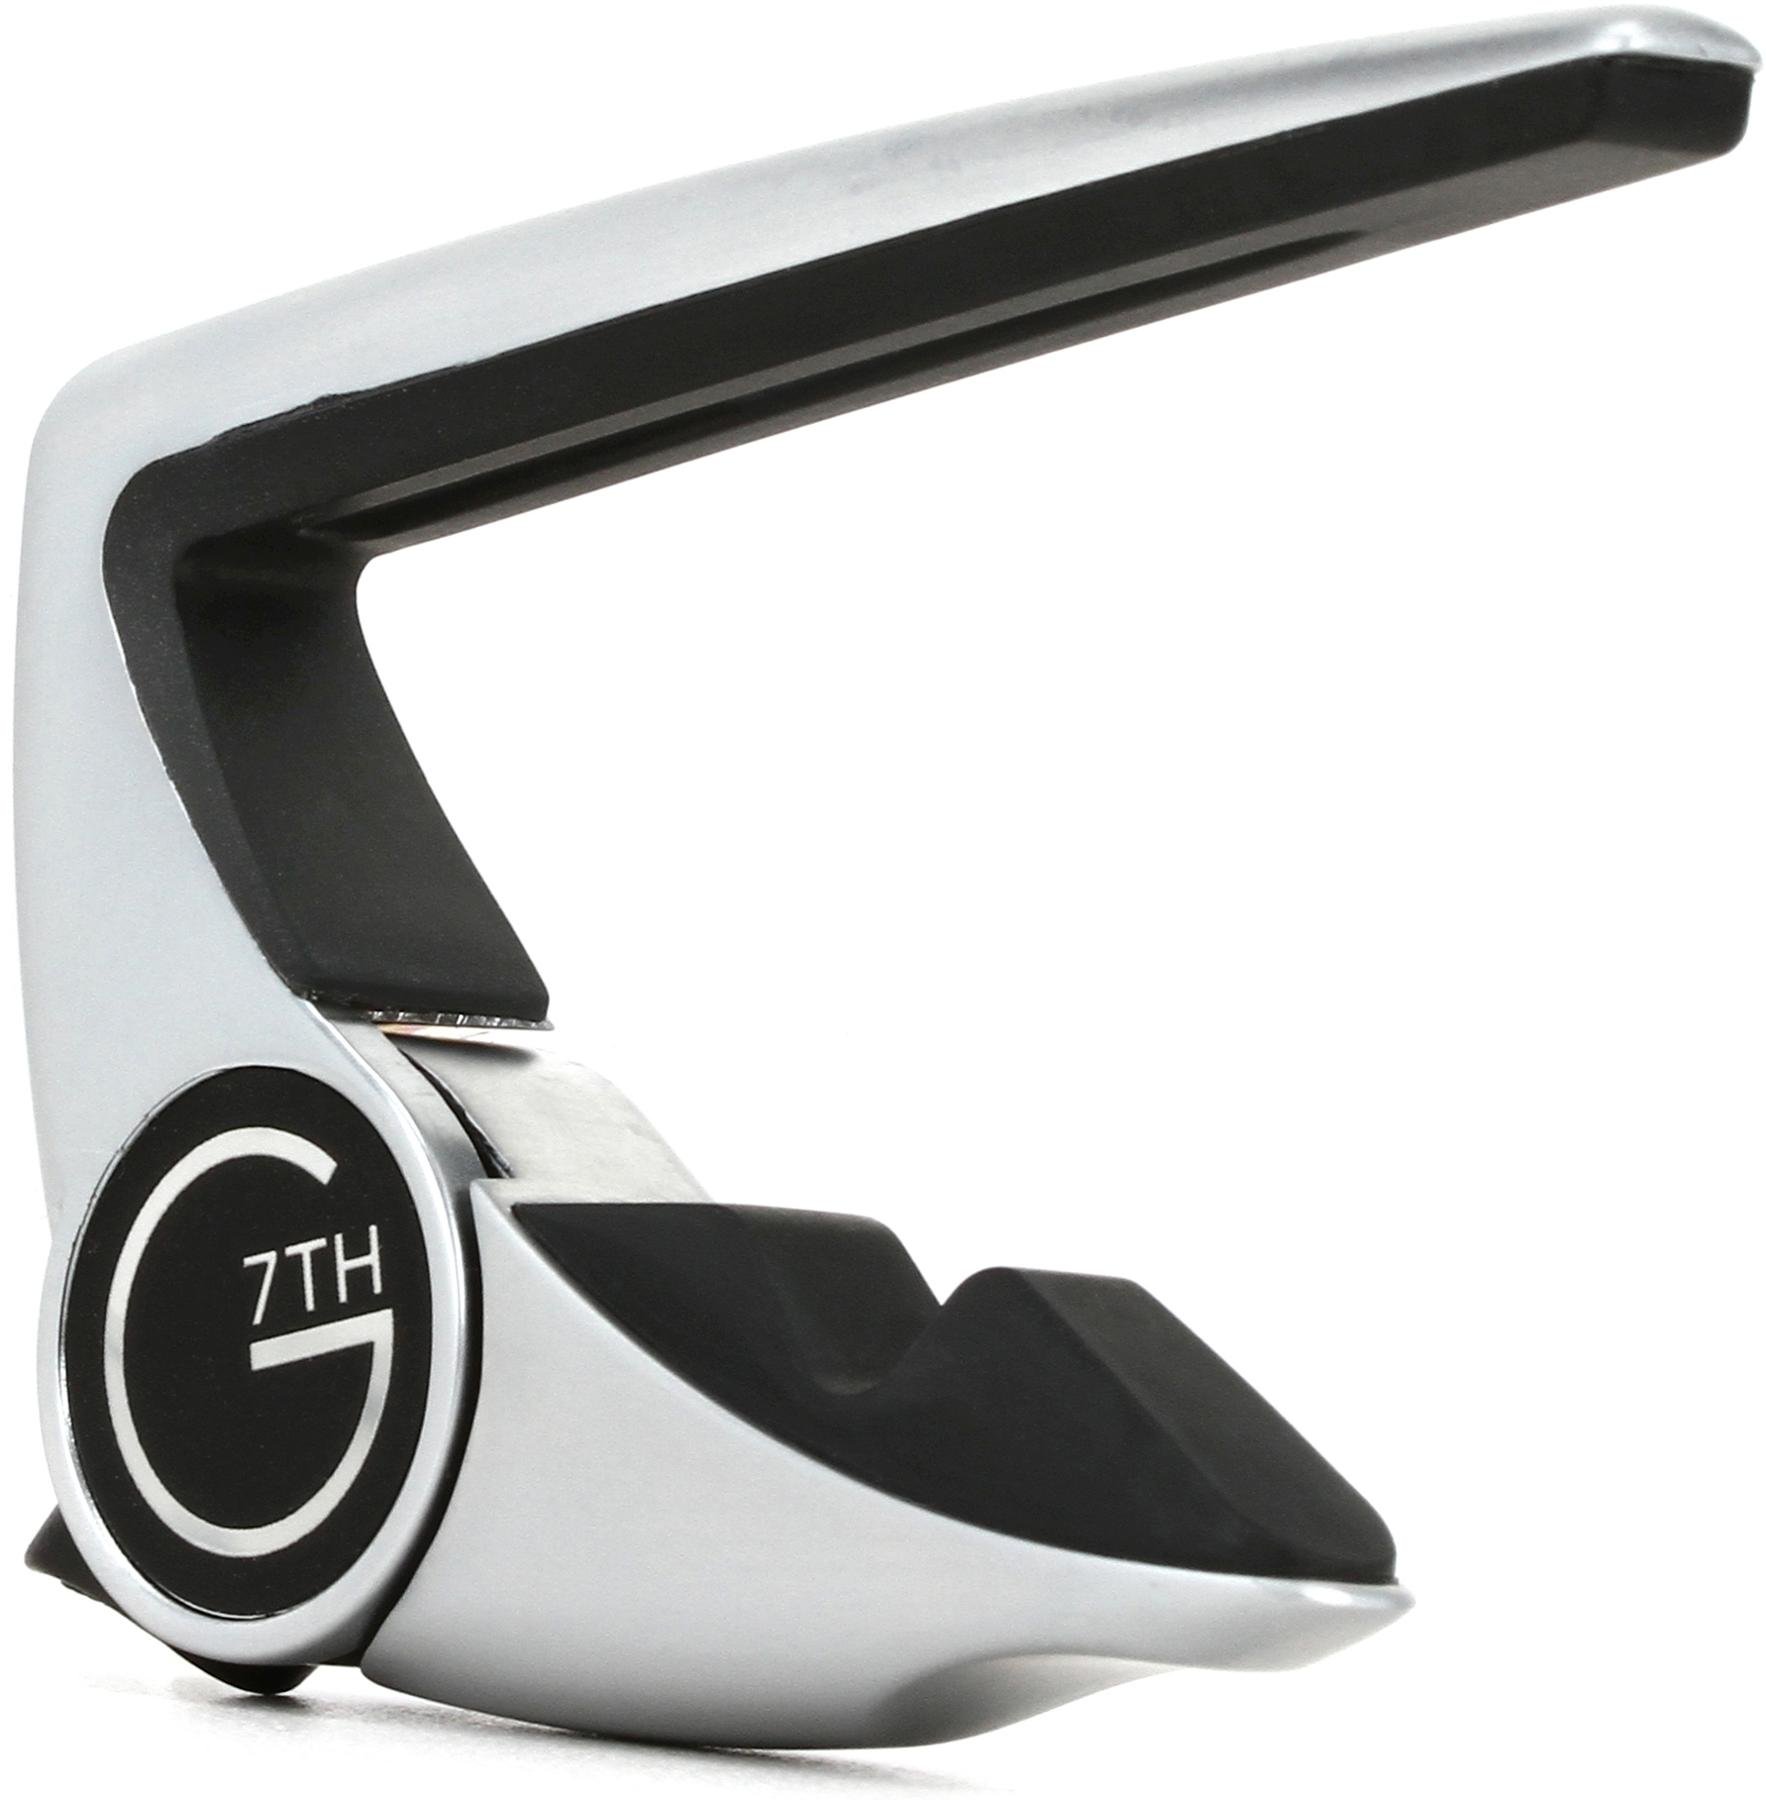 G7th Performance 2 Classical Guitar Capo - Silver | Sweetwater